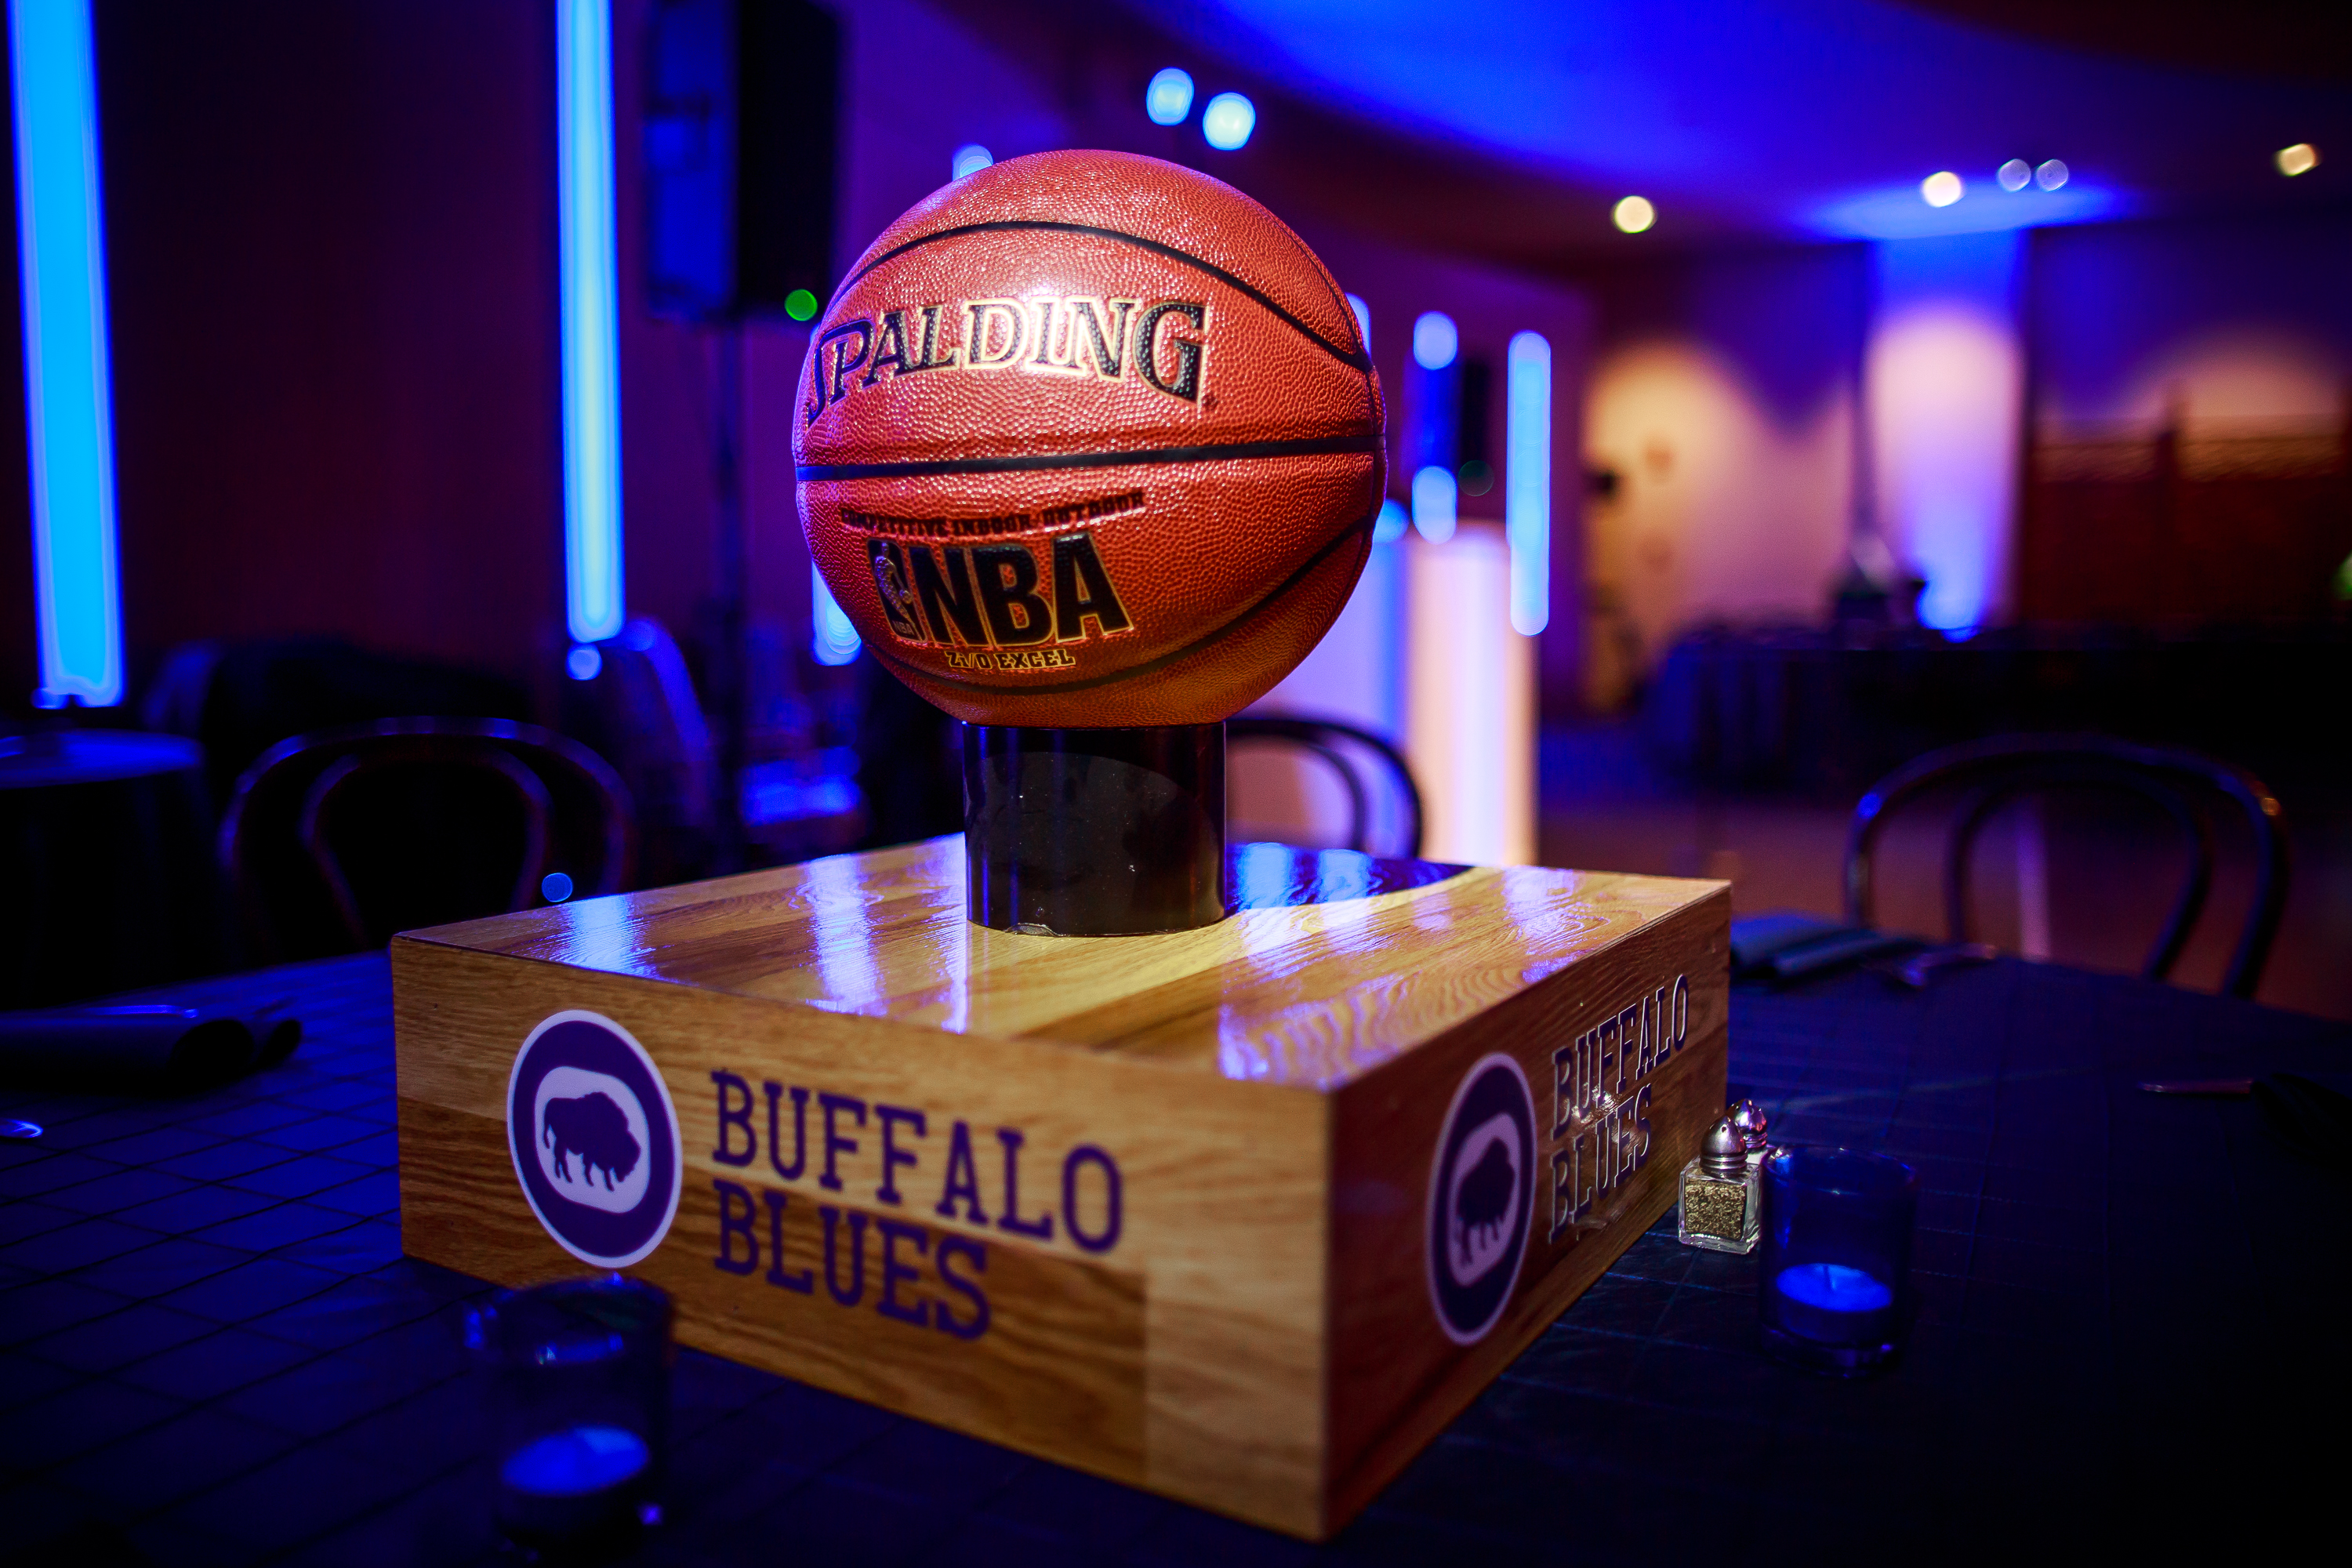 Football centerpiece at Vintage sports Bar Mitzvah party at Adas Israel in Washington DC | Pop Color Events | Adding a Pop of Color to Bar & Bat Mitzvahs in DC, MD & VA | Photo by Matt Mendelsohn Creative